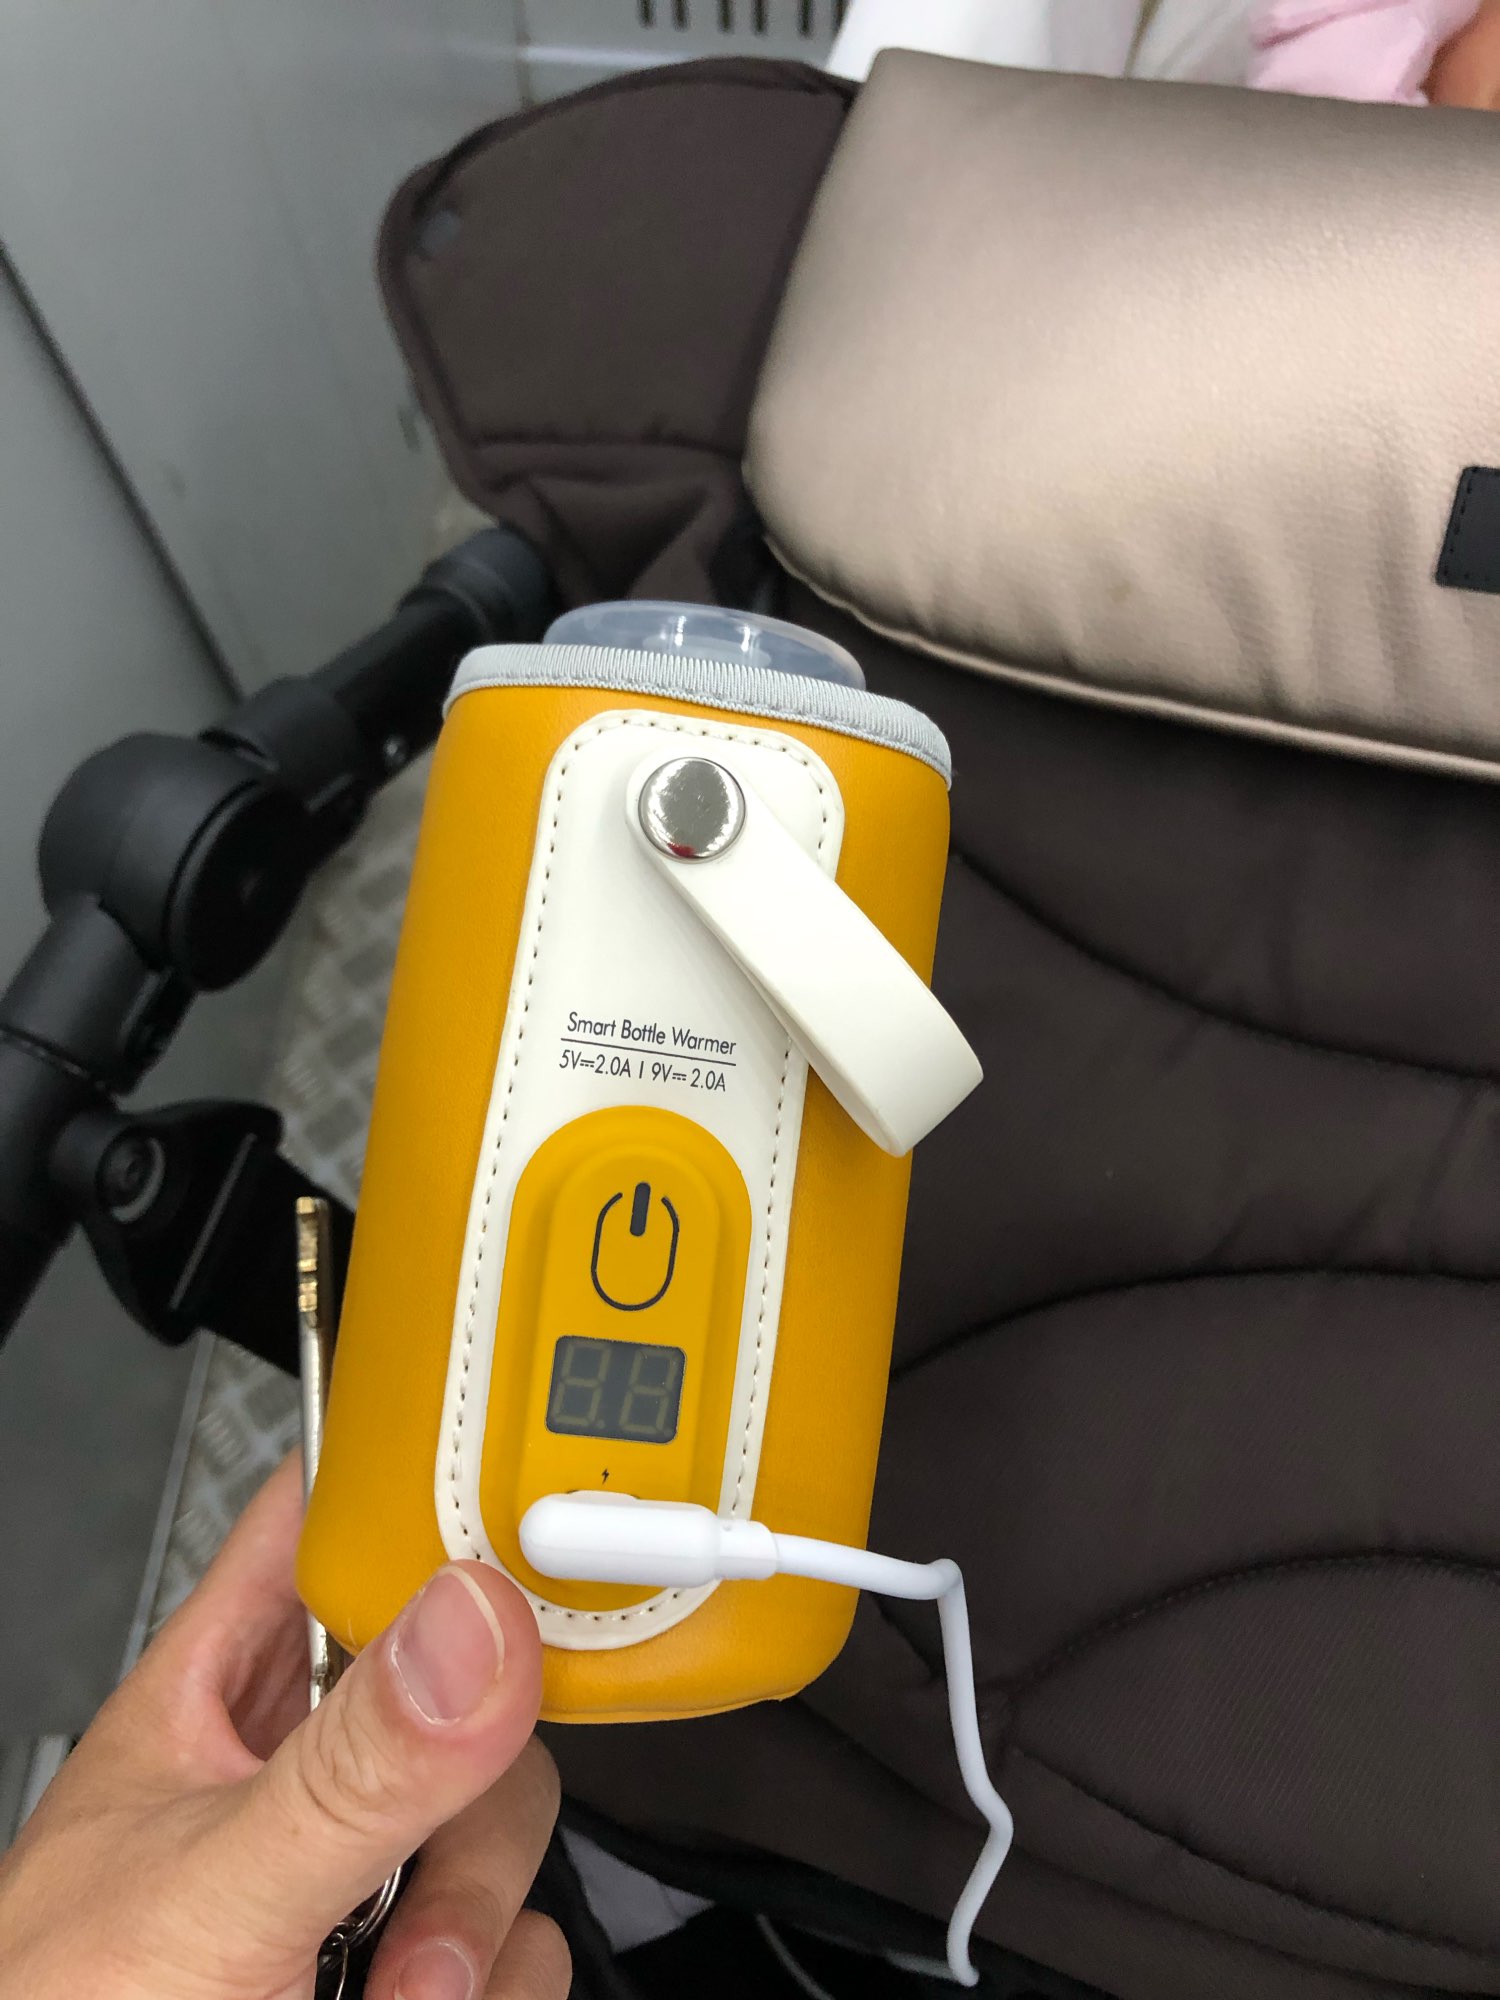 Universal Portable Car Travel Usb Baby Bottle Warmer photo review